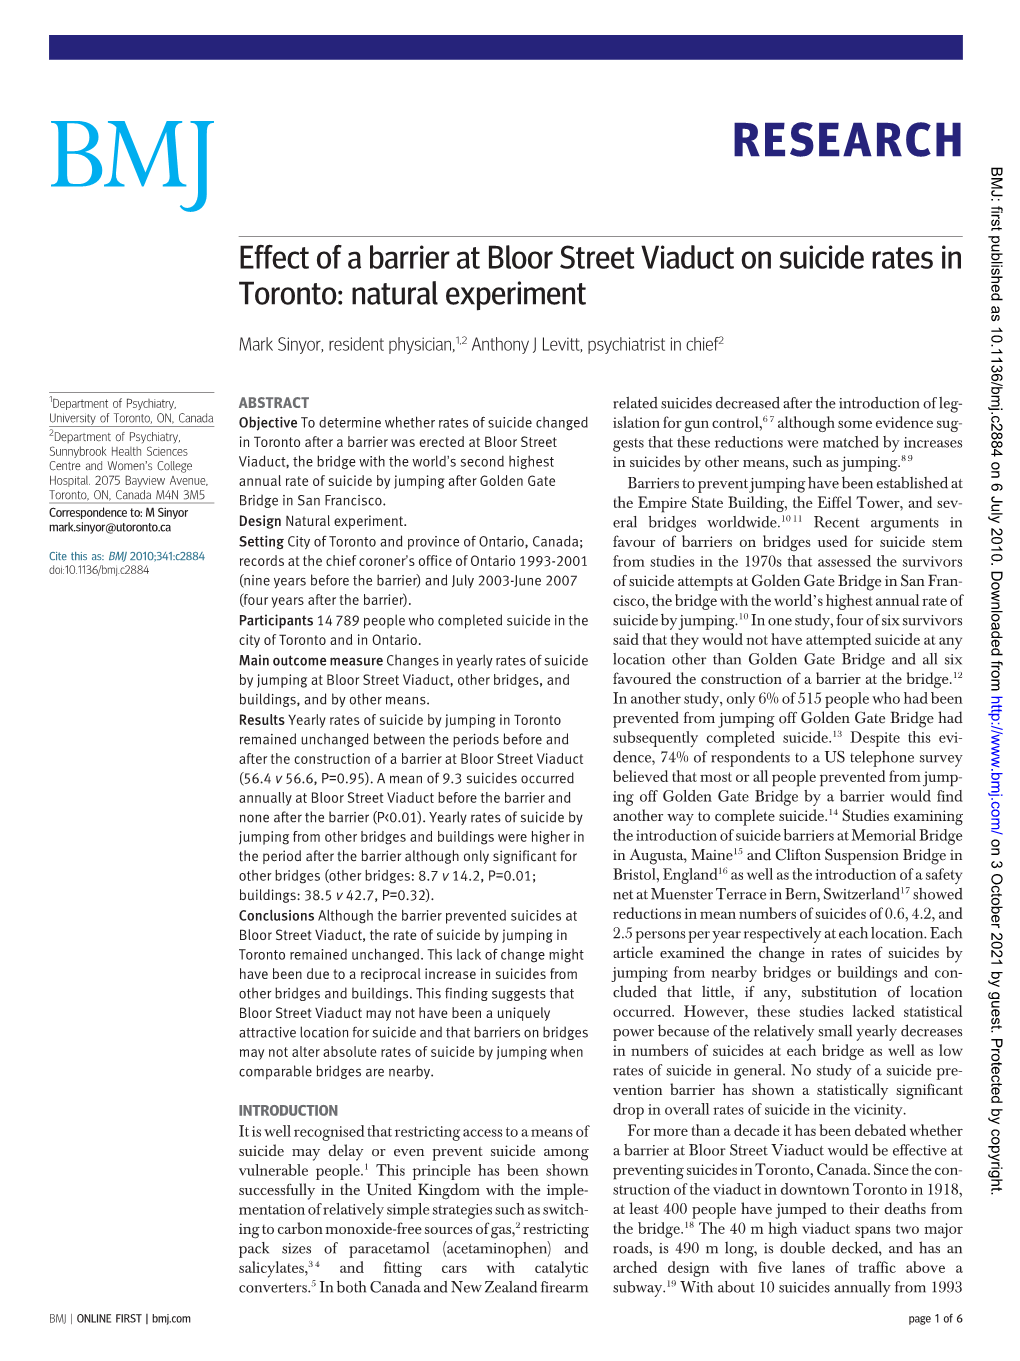 Effect of a Barrier at Bloor Street Viaduct on Suicide Rates in Toronto: Natural Experiment